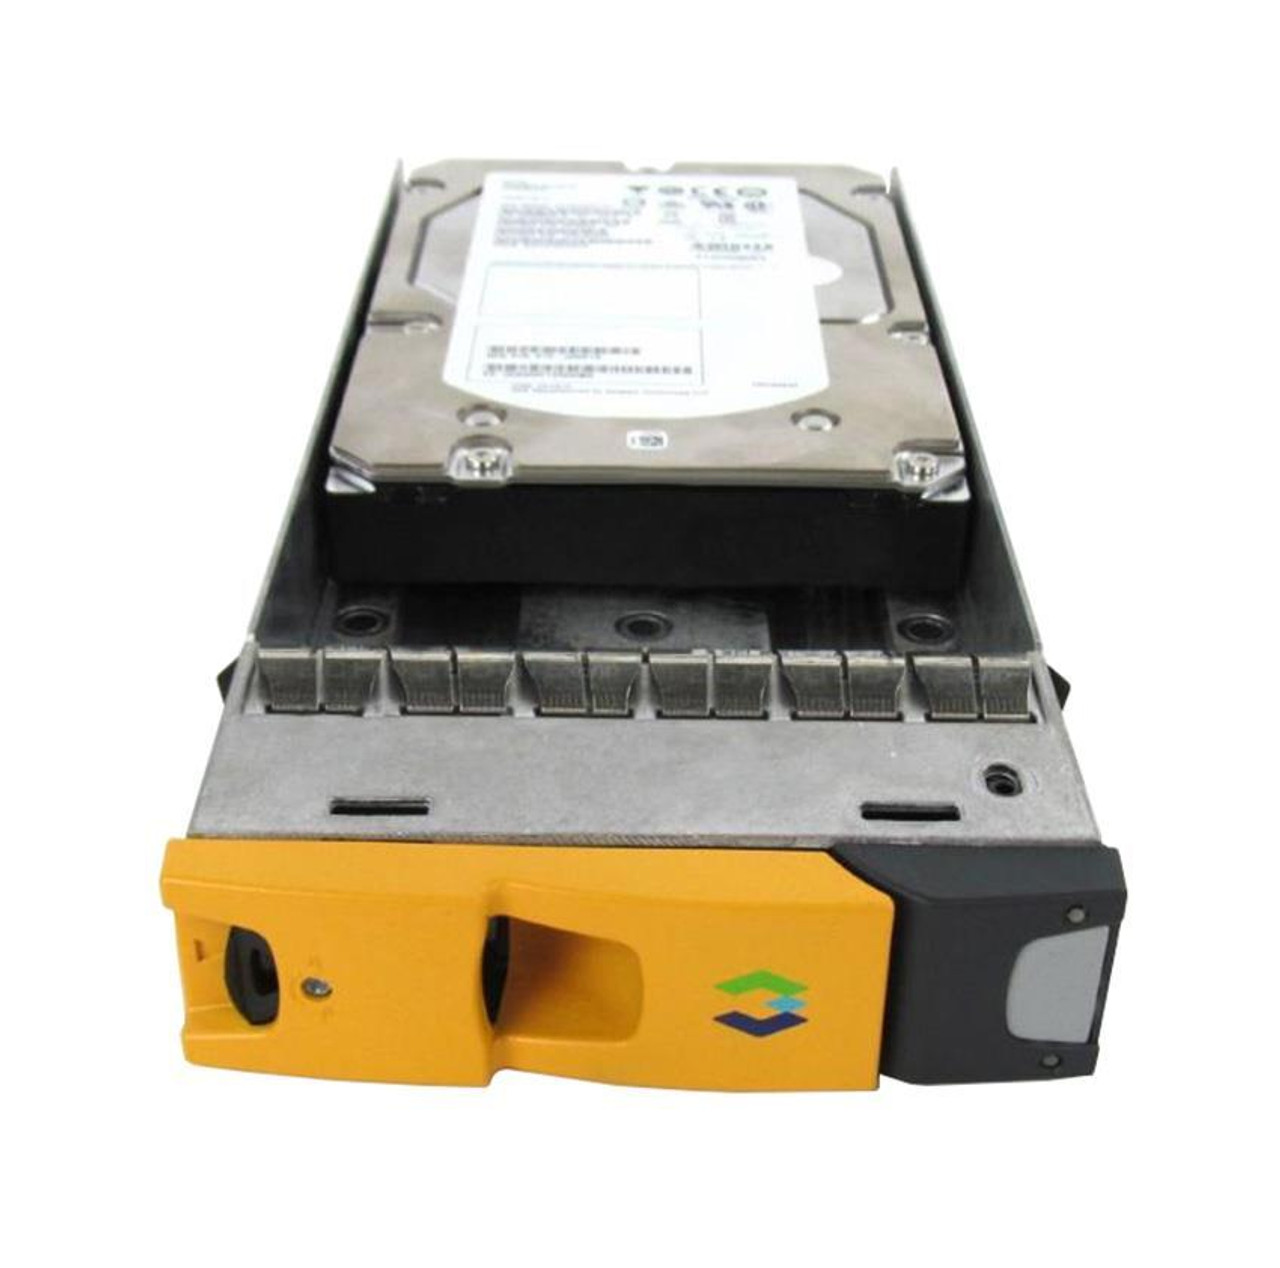 P9B45B HPE 8TB 7200RPM SAS 12Gbps (FIPS) 3.5-inch Internal Hard Drive with Software for 3PAR StoreServ 8000